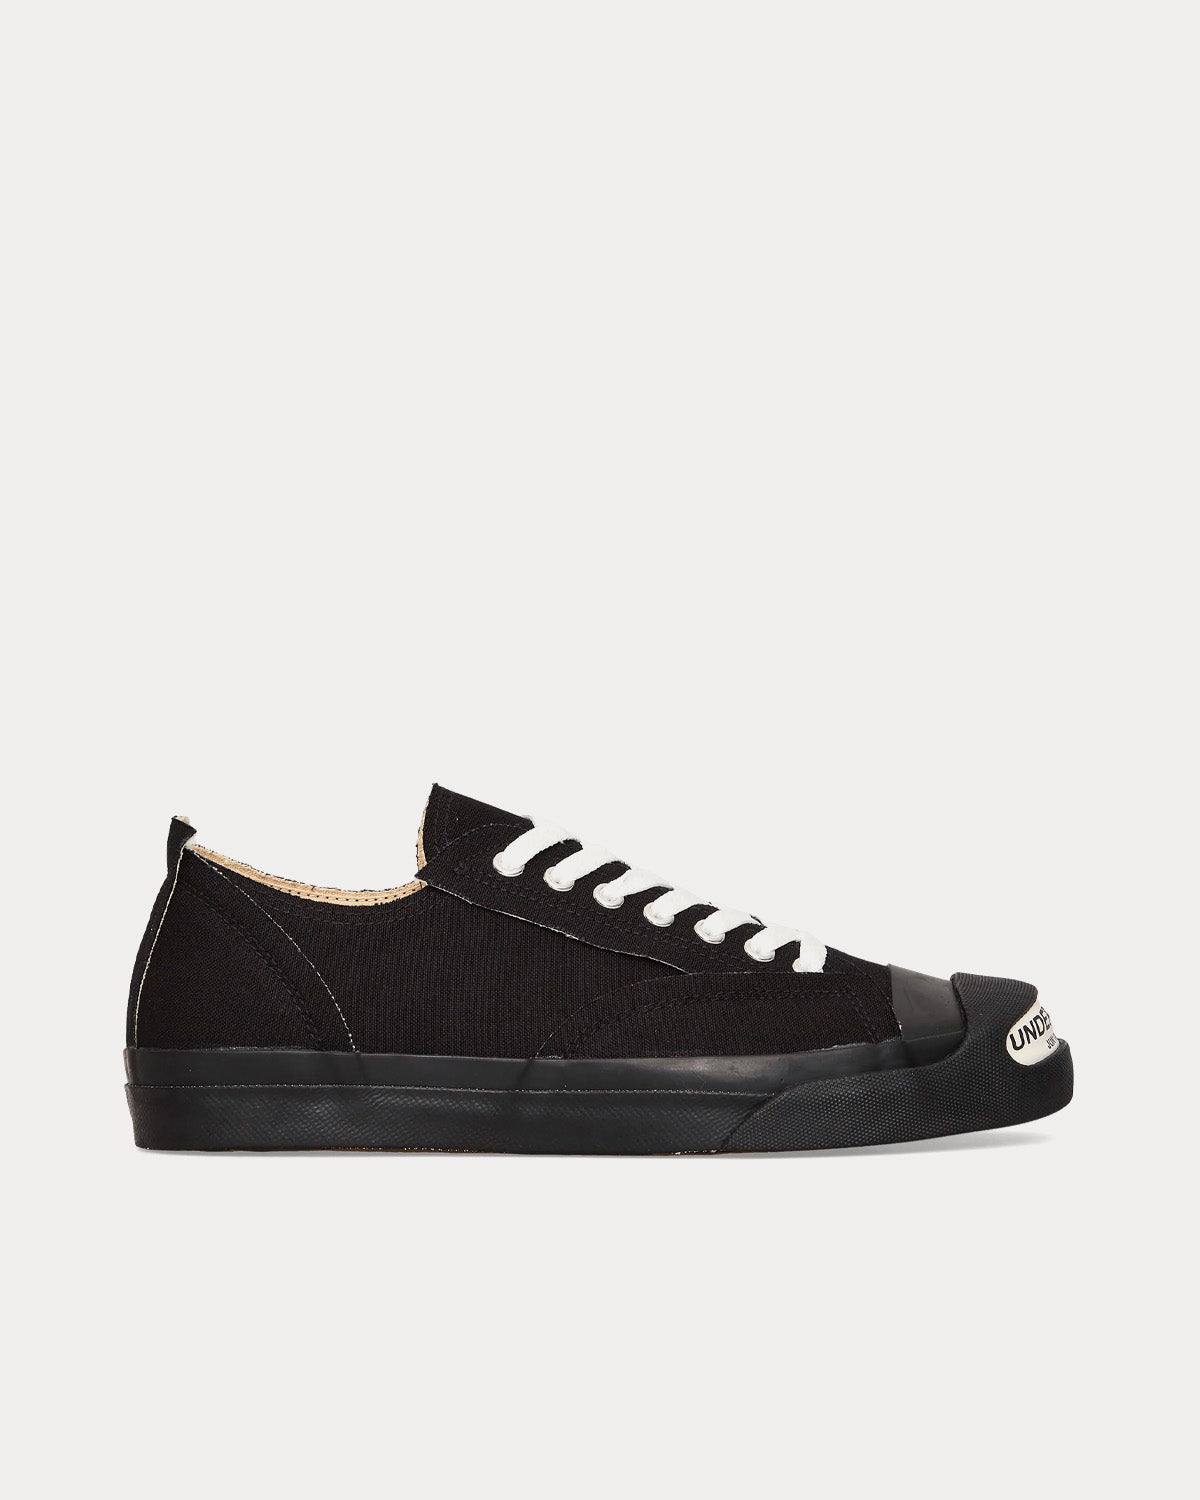 Undercover - Canvas Black Low Top Sneakers